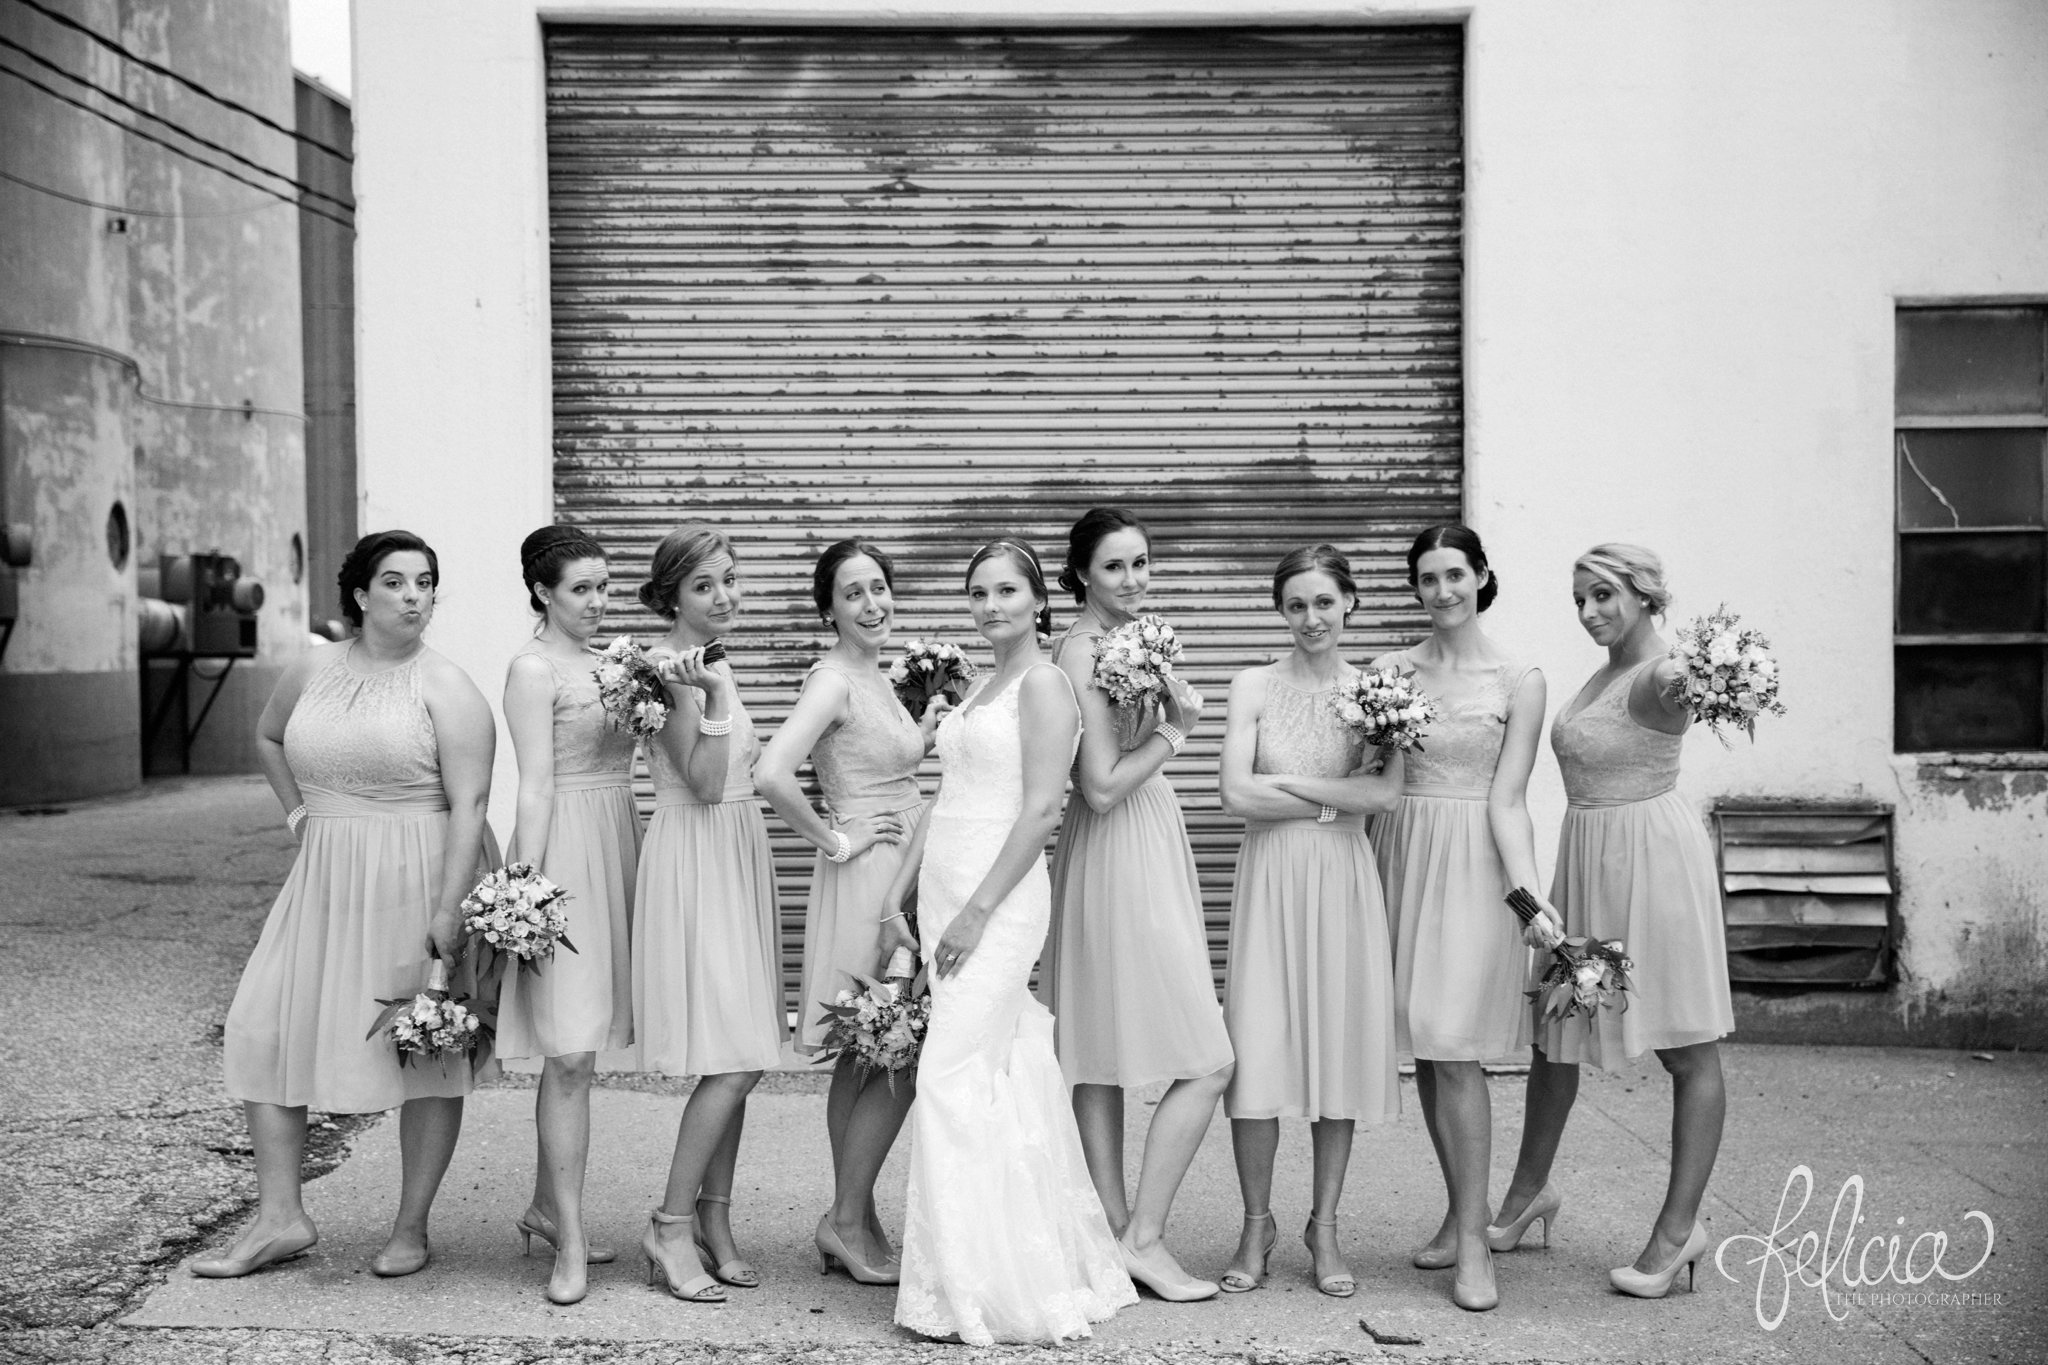 Black and White | Wedding | Wedding Photography | Wedding Photos | Travel Photographer | Images by feliciathephotographer.com | Kansas | Rustic Background | Agricultural | Industrial | Bridesmaid Portrait | Bride with Bridesmaids | Sassy | Candid 